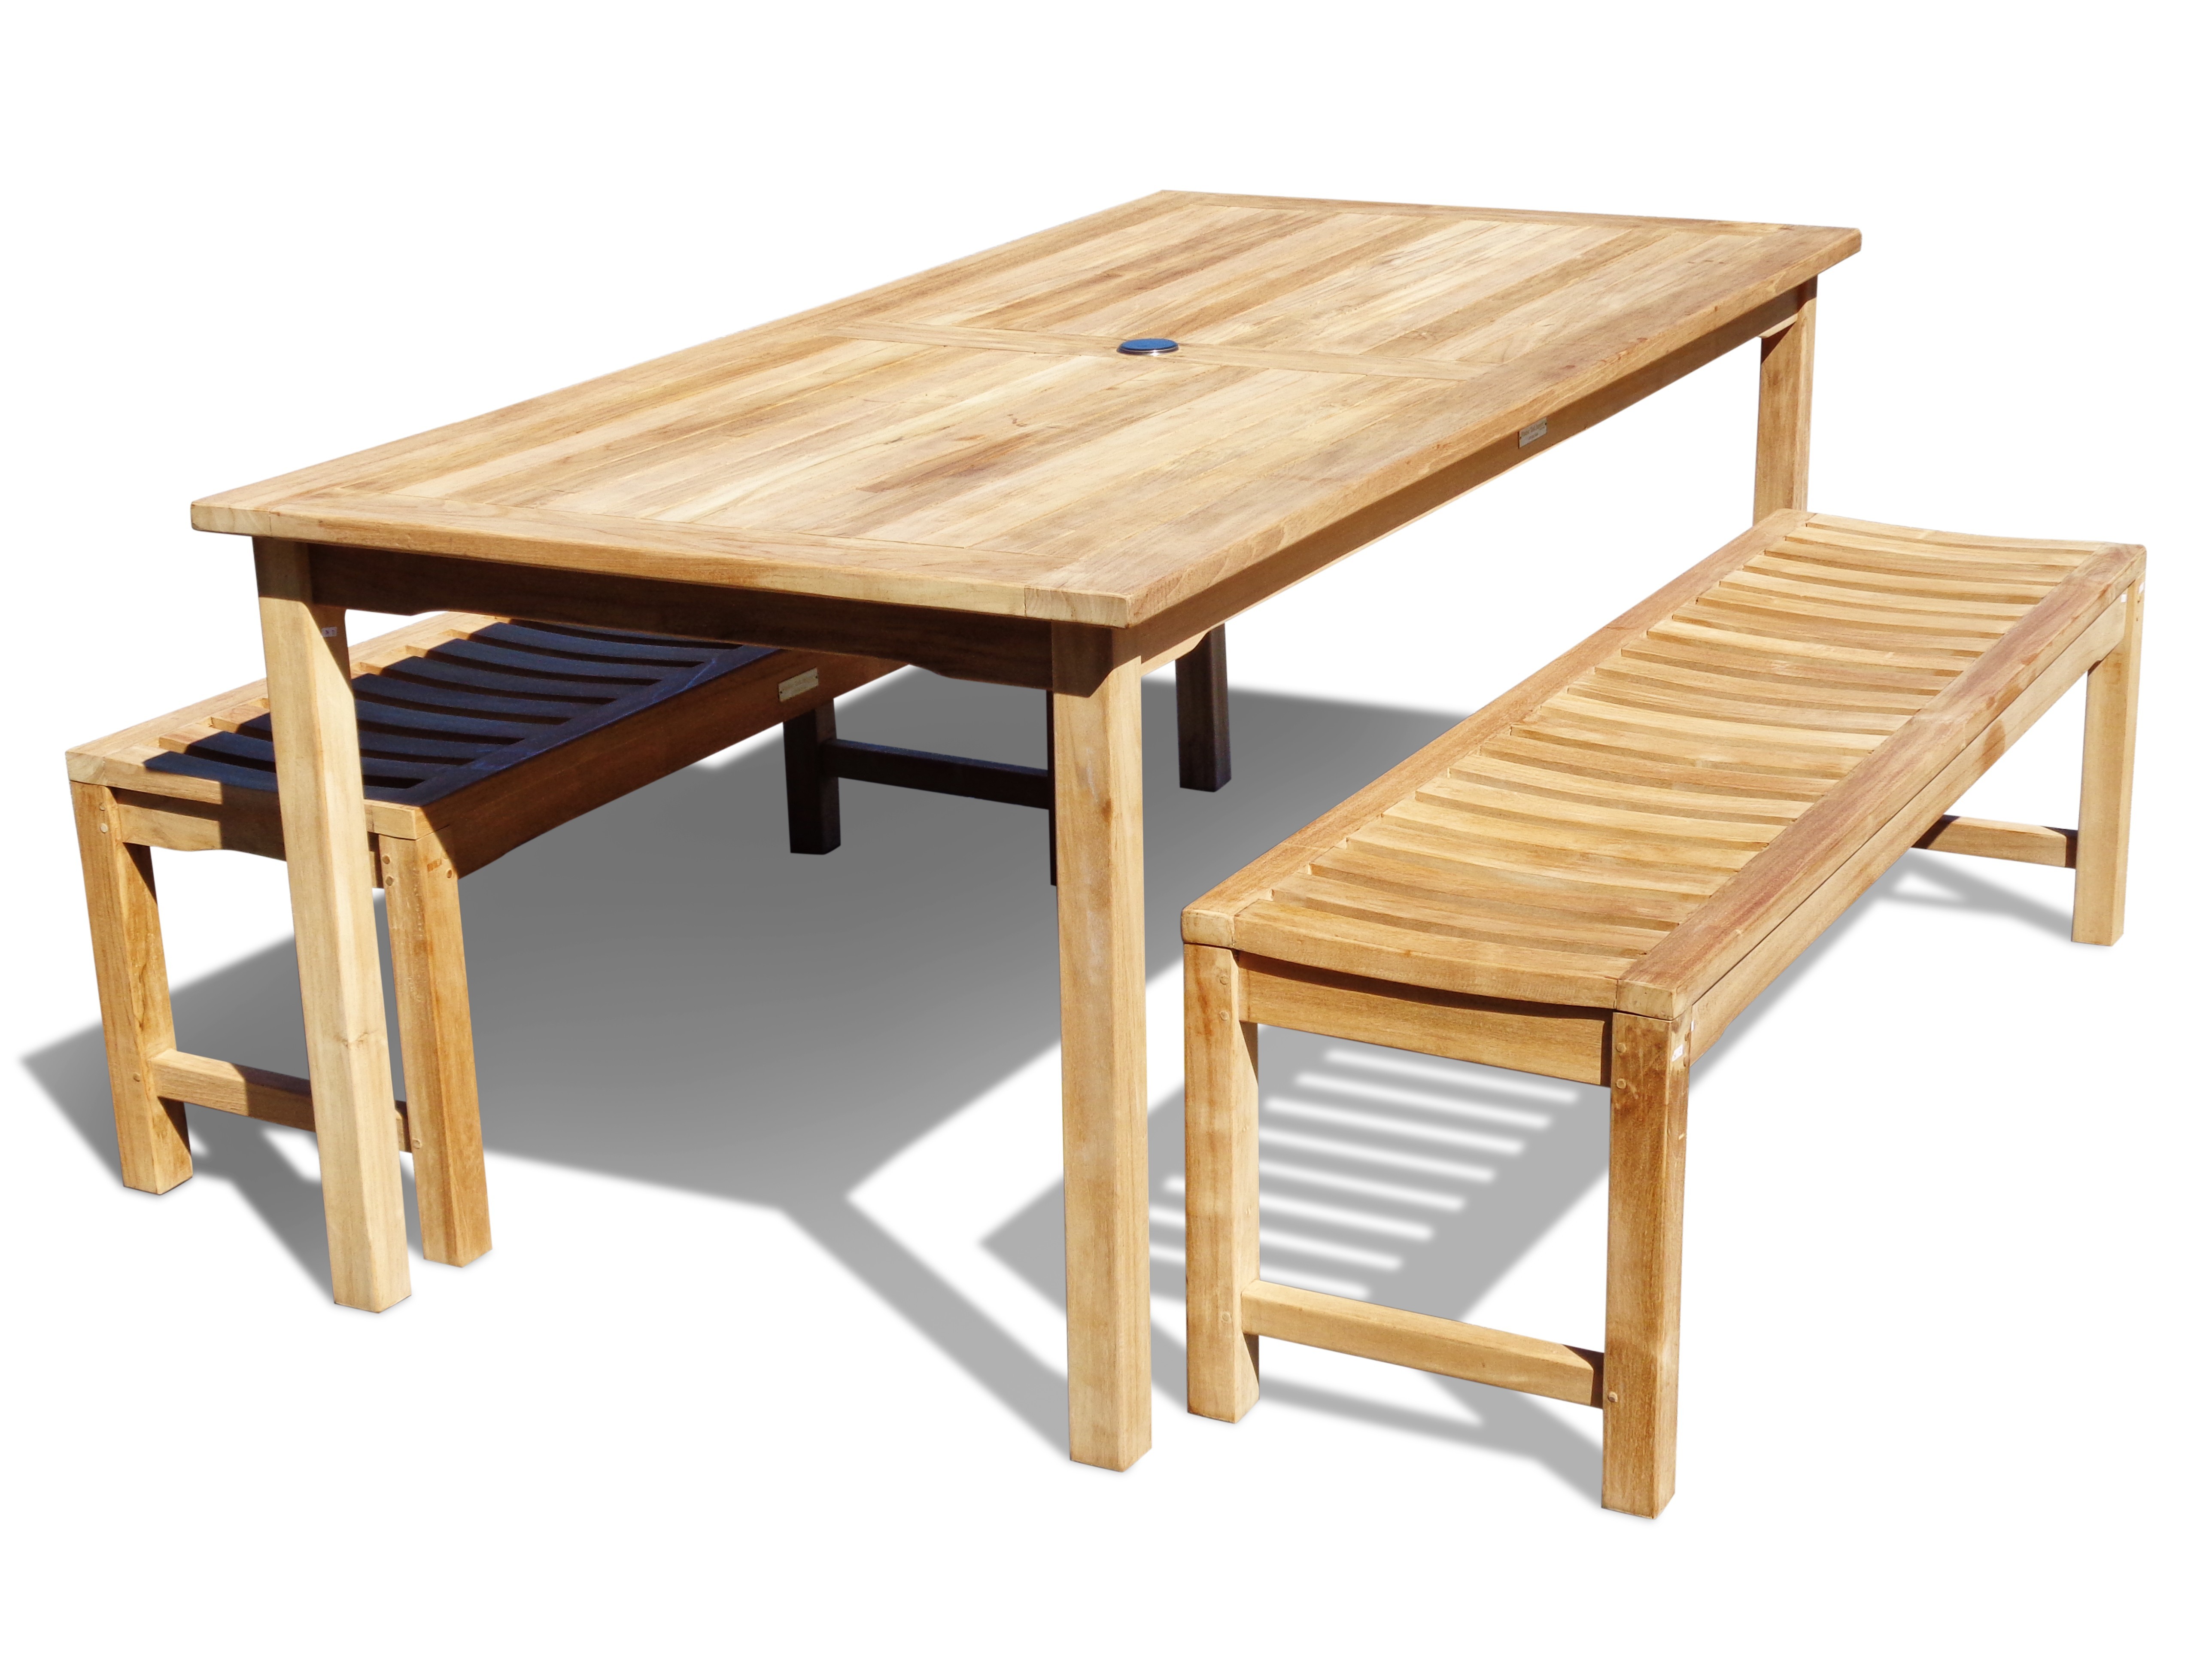 Cannes 82" x 35" Rectangular Dining Table w/Two 72" Contoured Seat Backless Benches ...seats 8...add 2 Chairs & seat 10